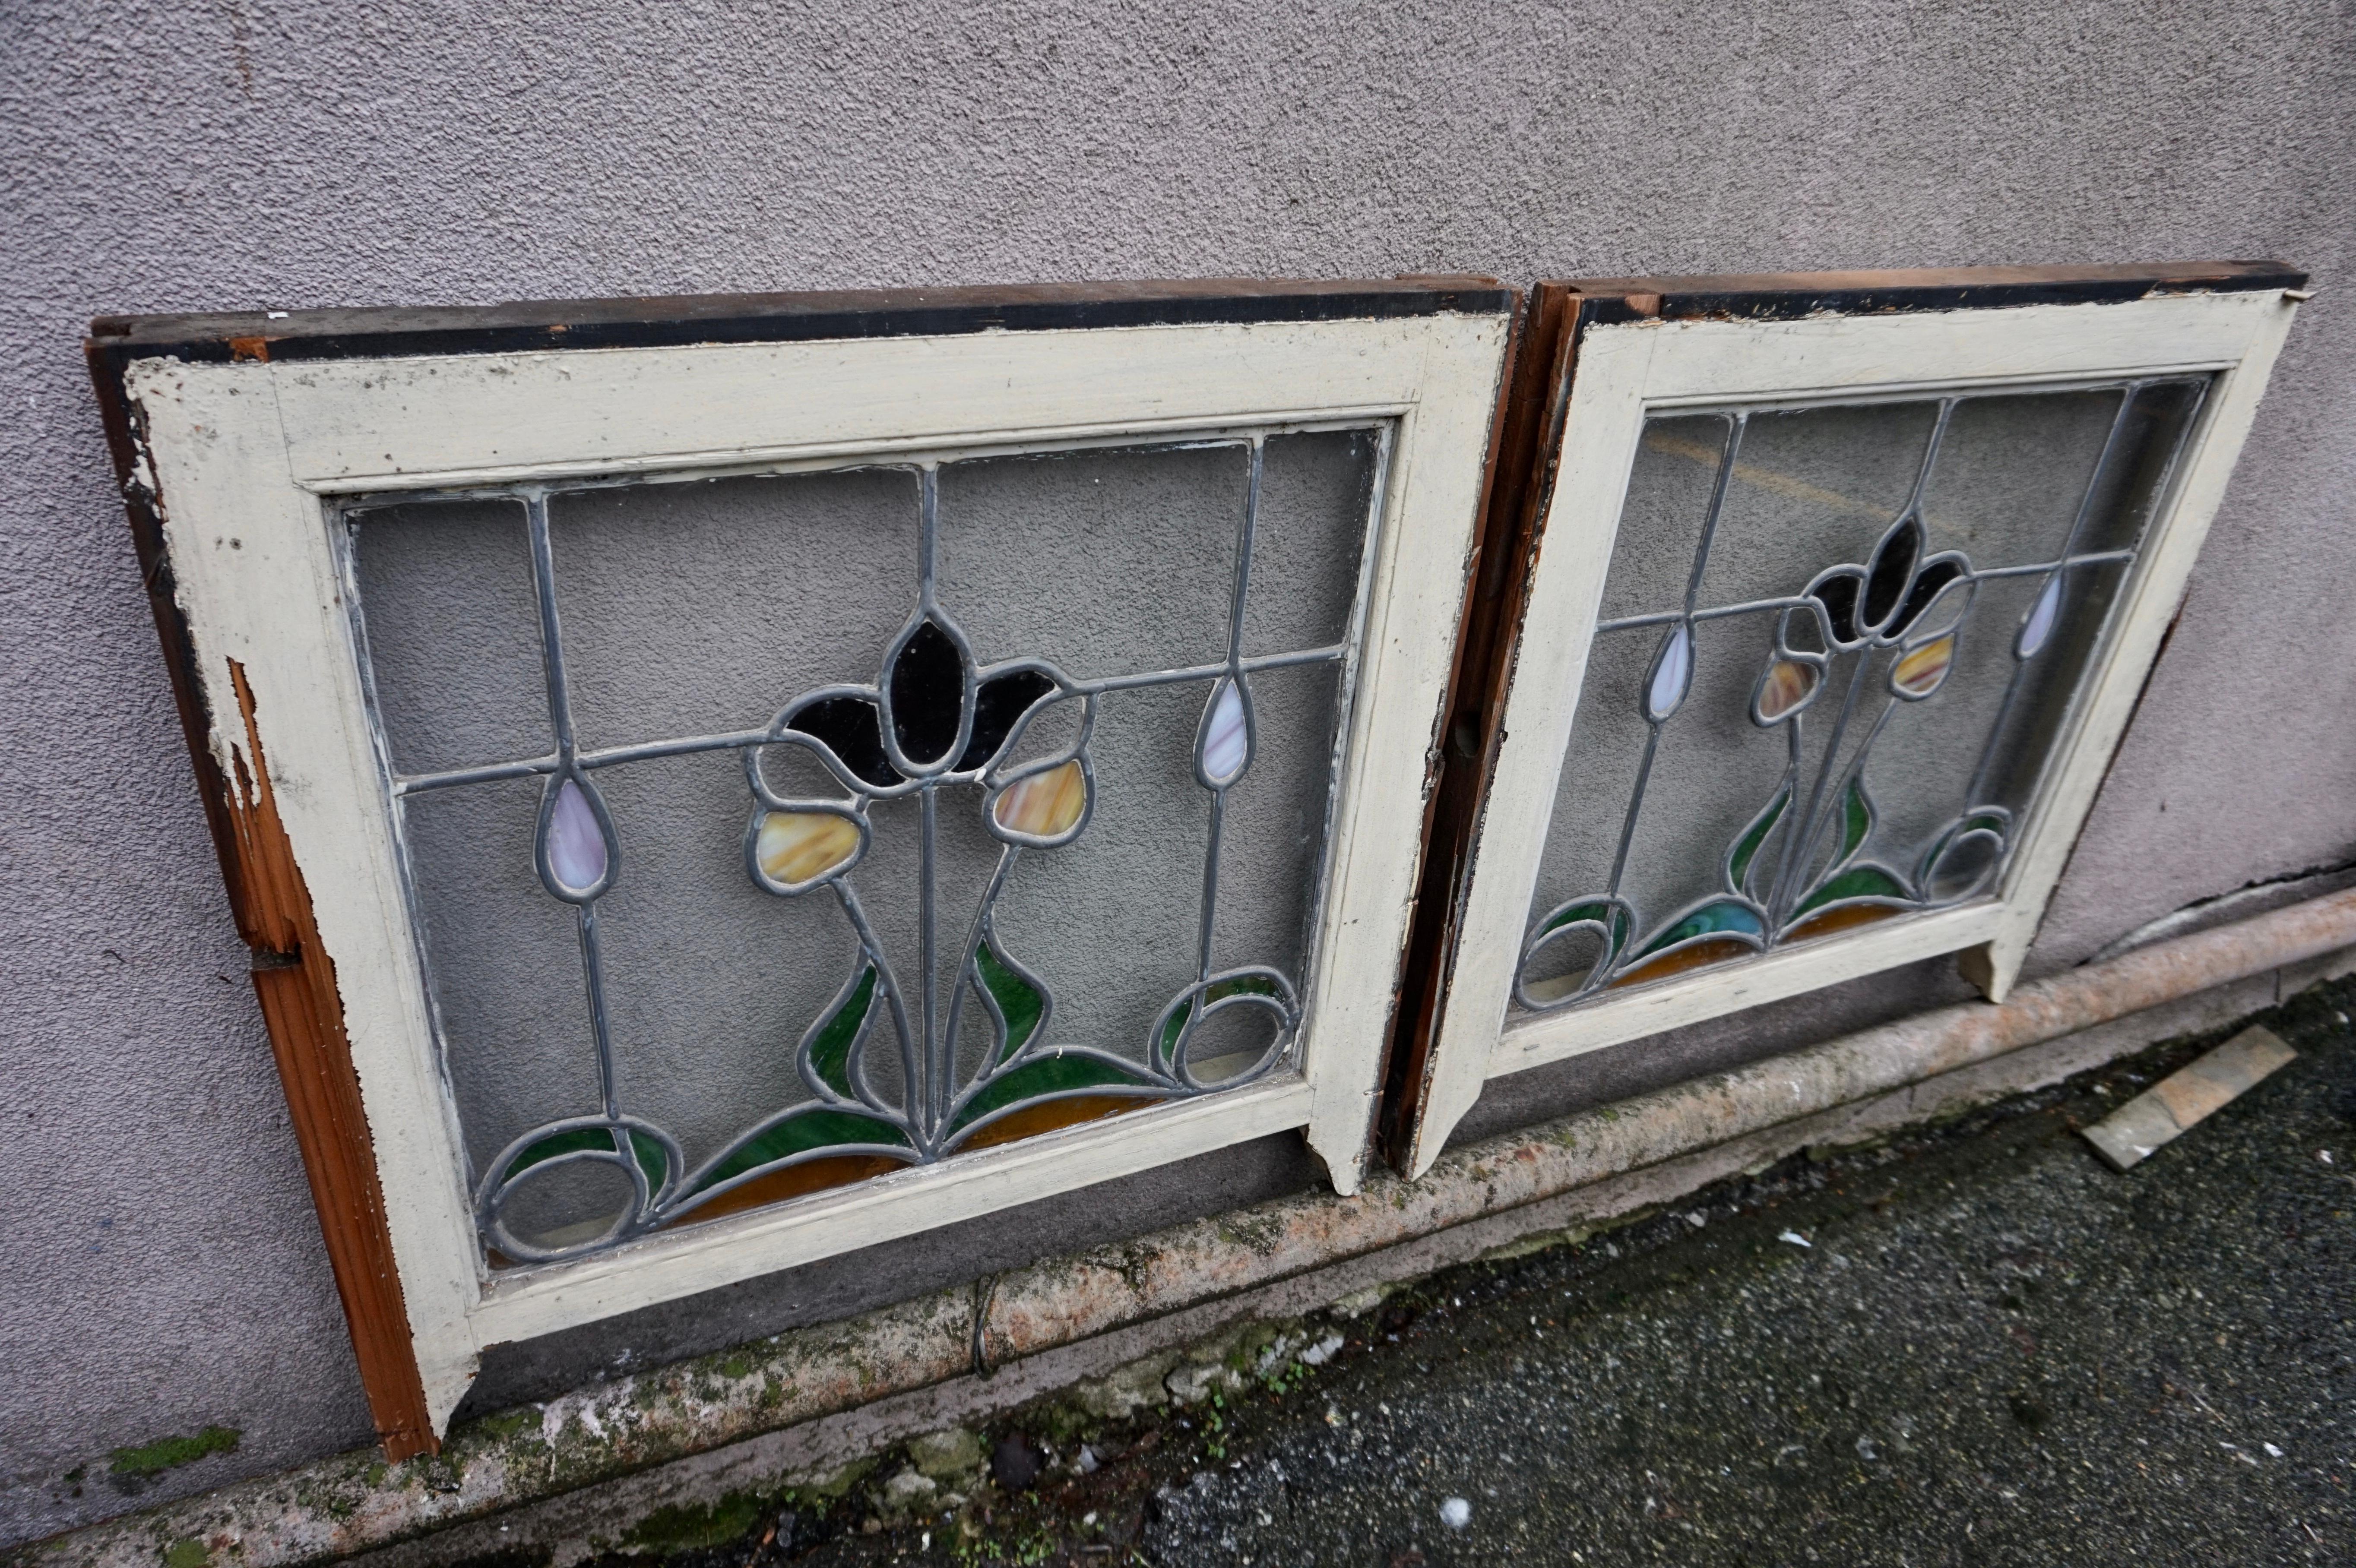 Pair Of Rare Art Nouveau Stain Glass Windows With Scrolling Tulip & Bud Motif For Sale 7